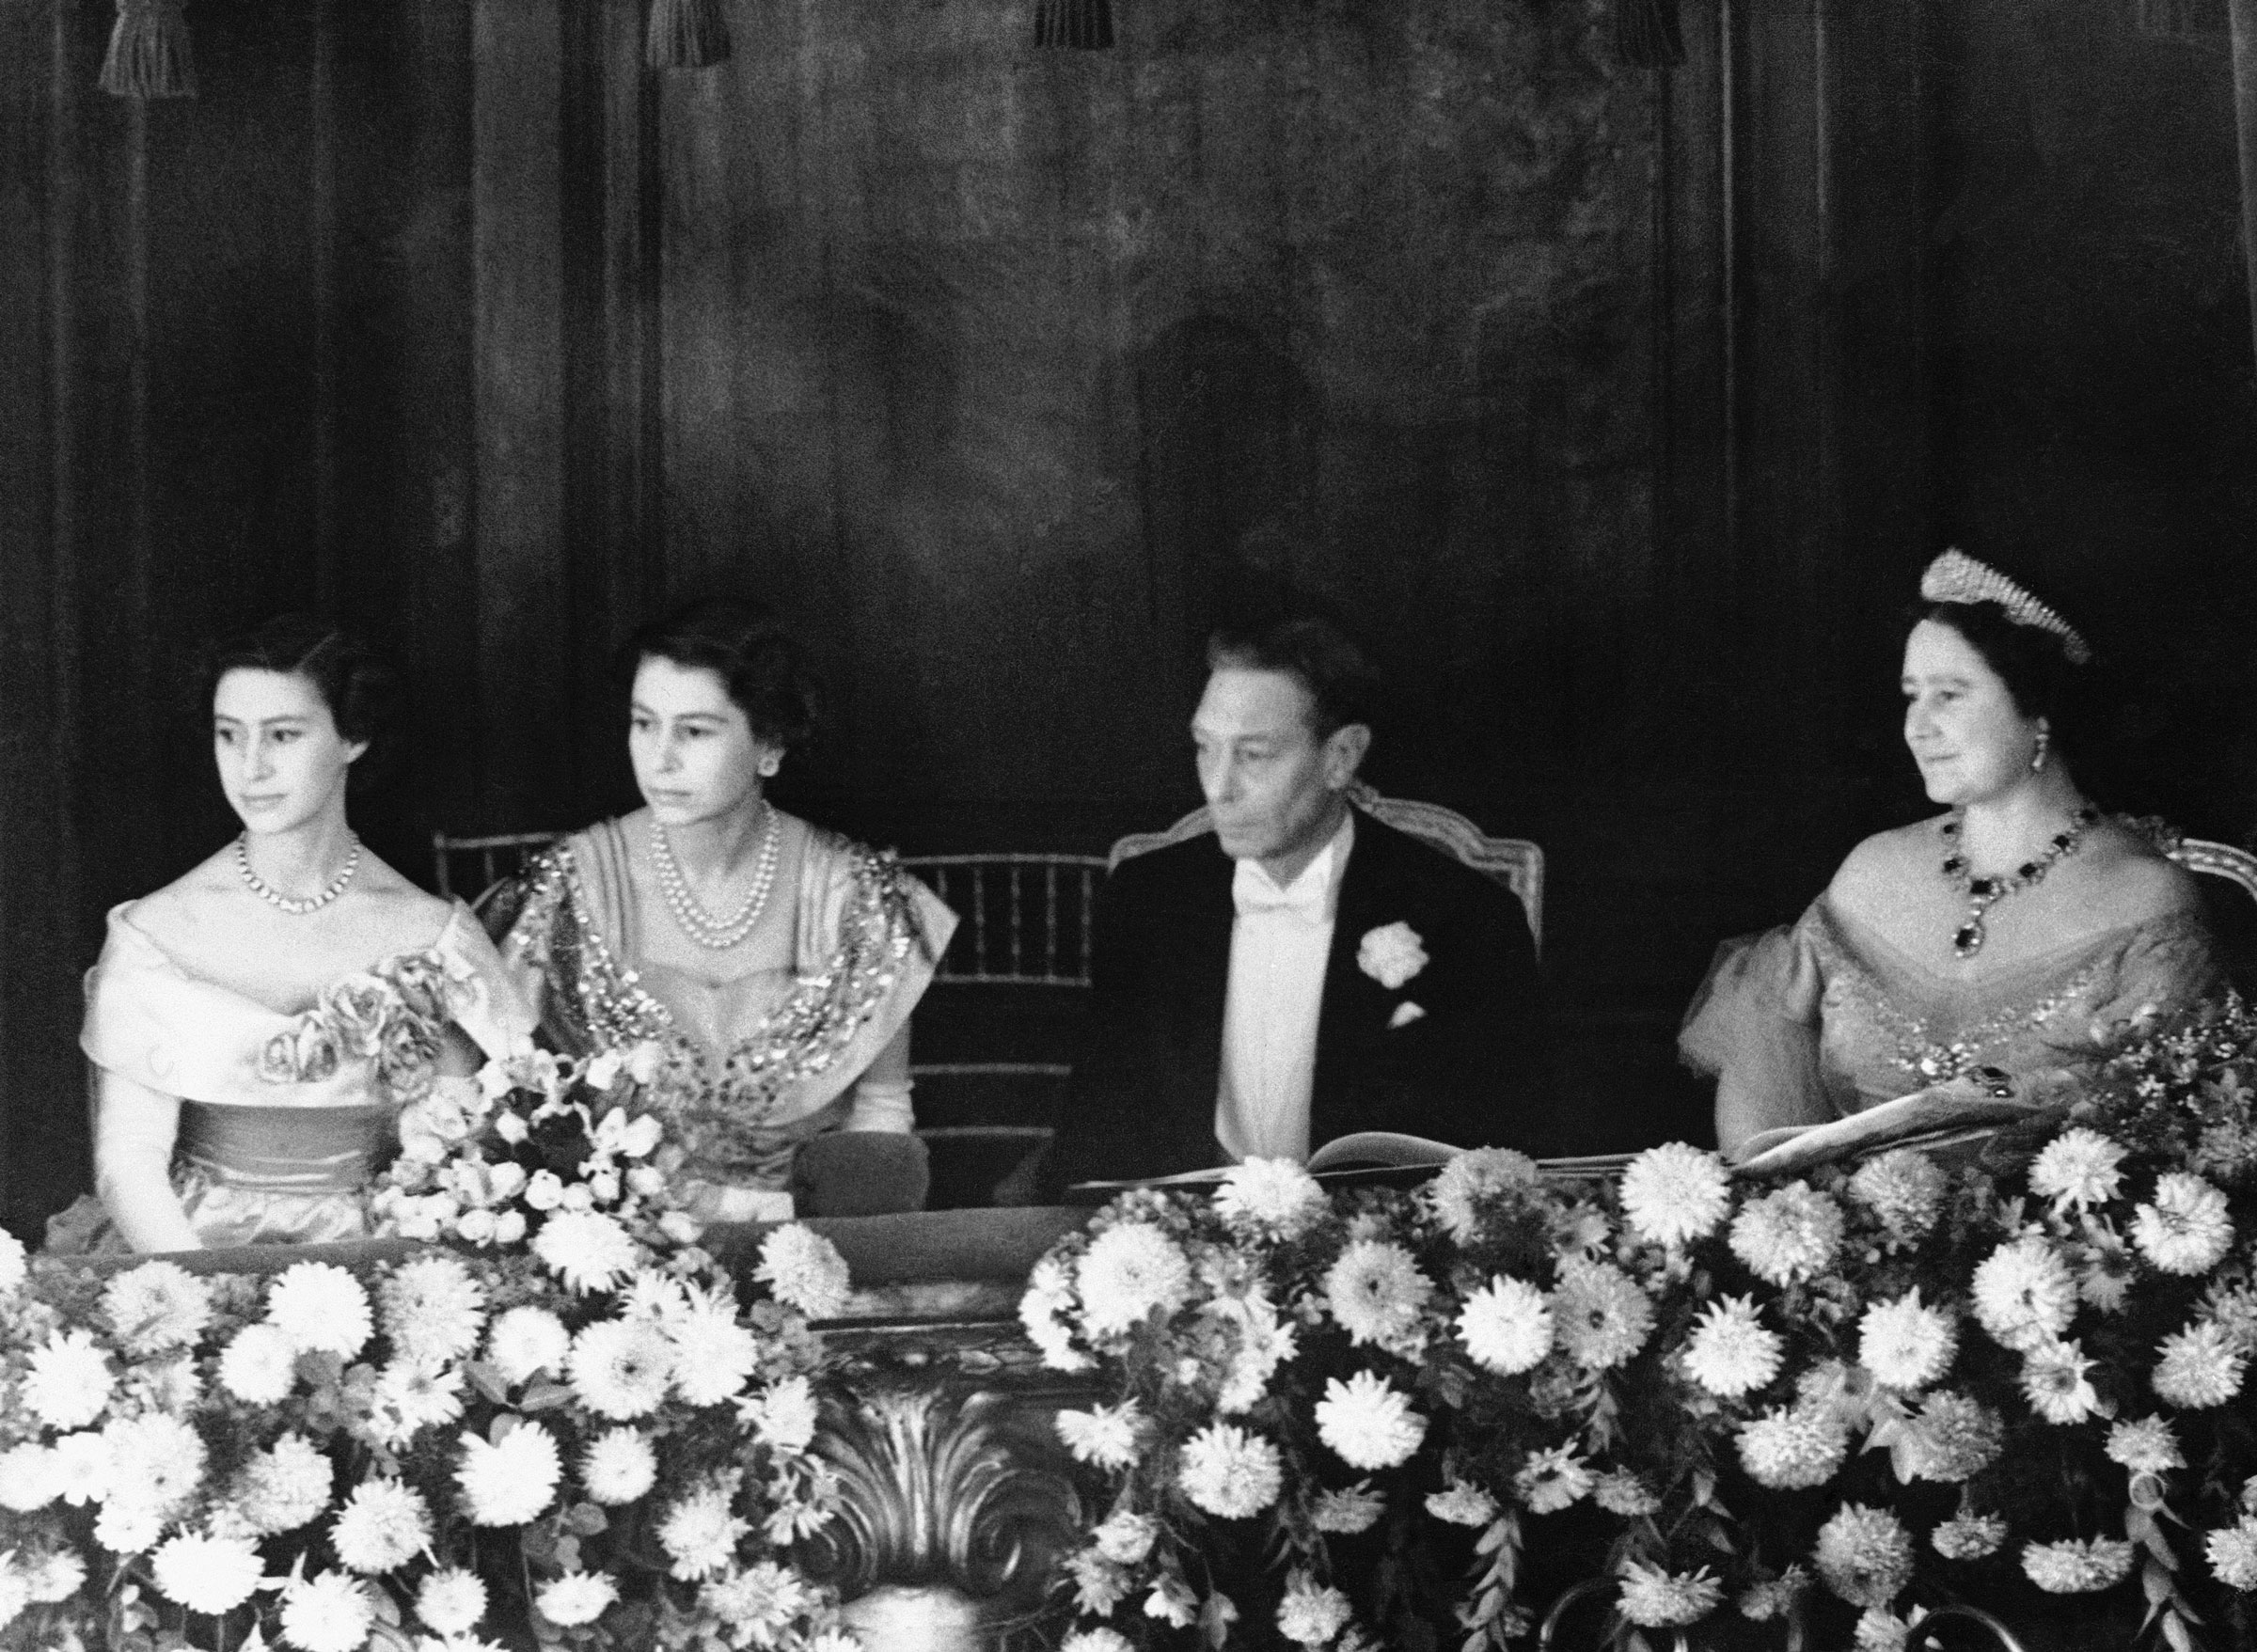 King George VI and Queen Elizabeth sit in their box with Princess Margaret Rose and Elizabeth at the Palladium Theater in London on November 13, 1950.